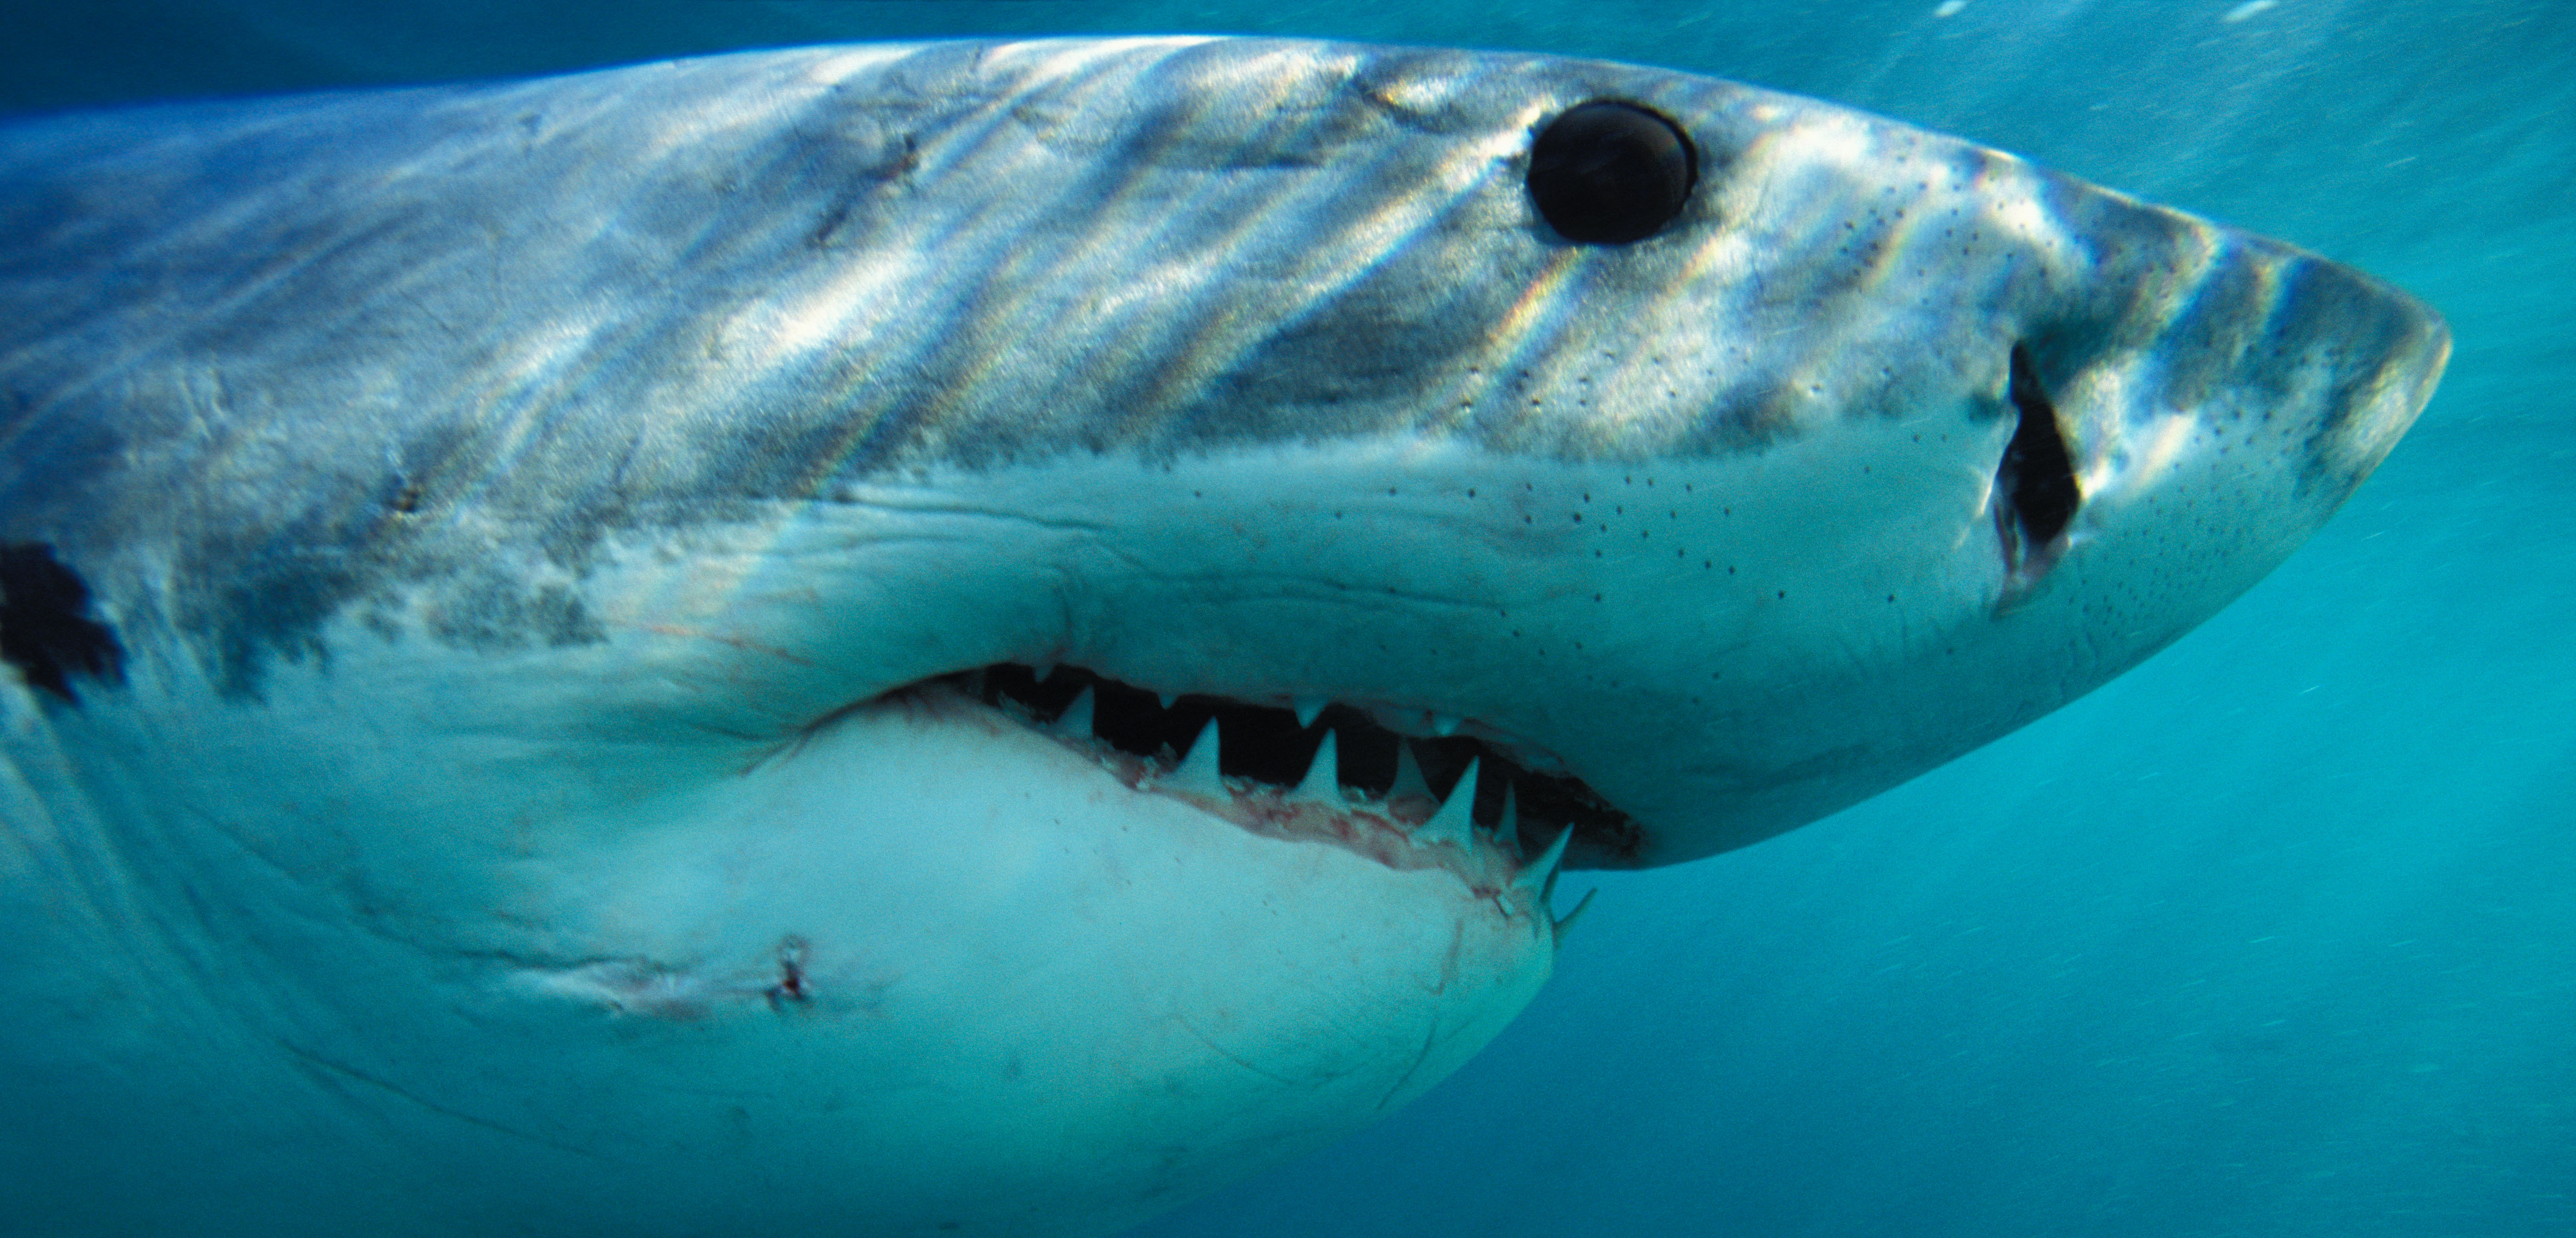 Sharks are a broad and diverse group of species, but in the public imagination we tend to treat them all the same. Photo by Brandon Cole Marine Photography/Alamy Stock Photo